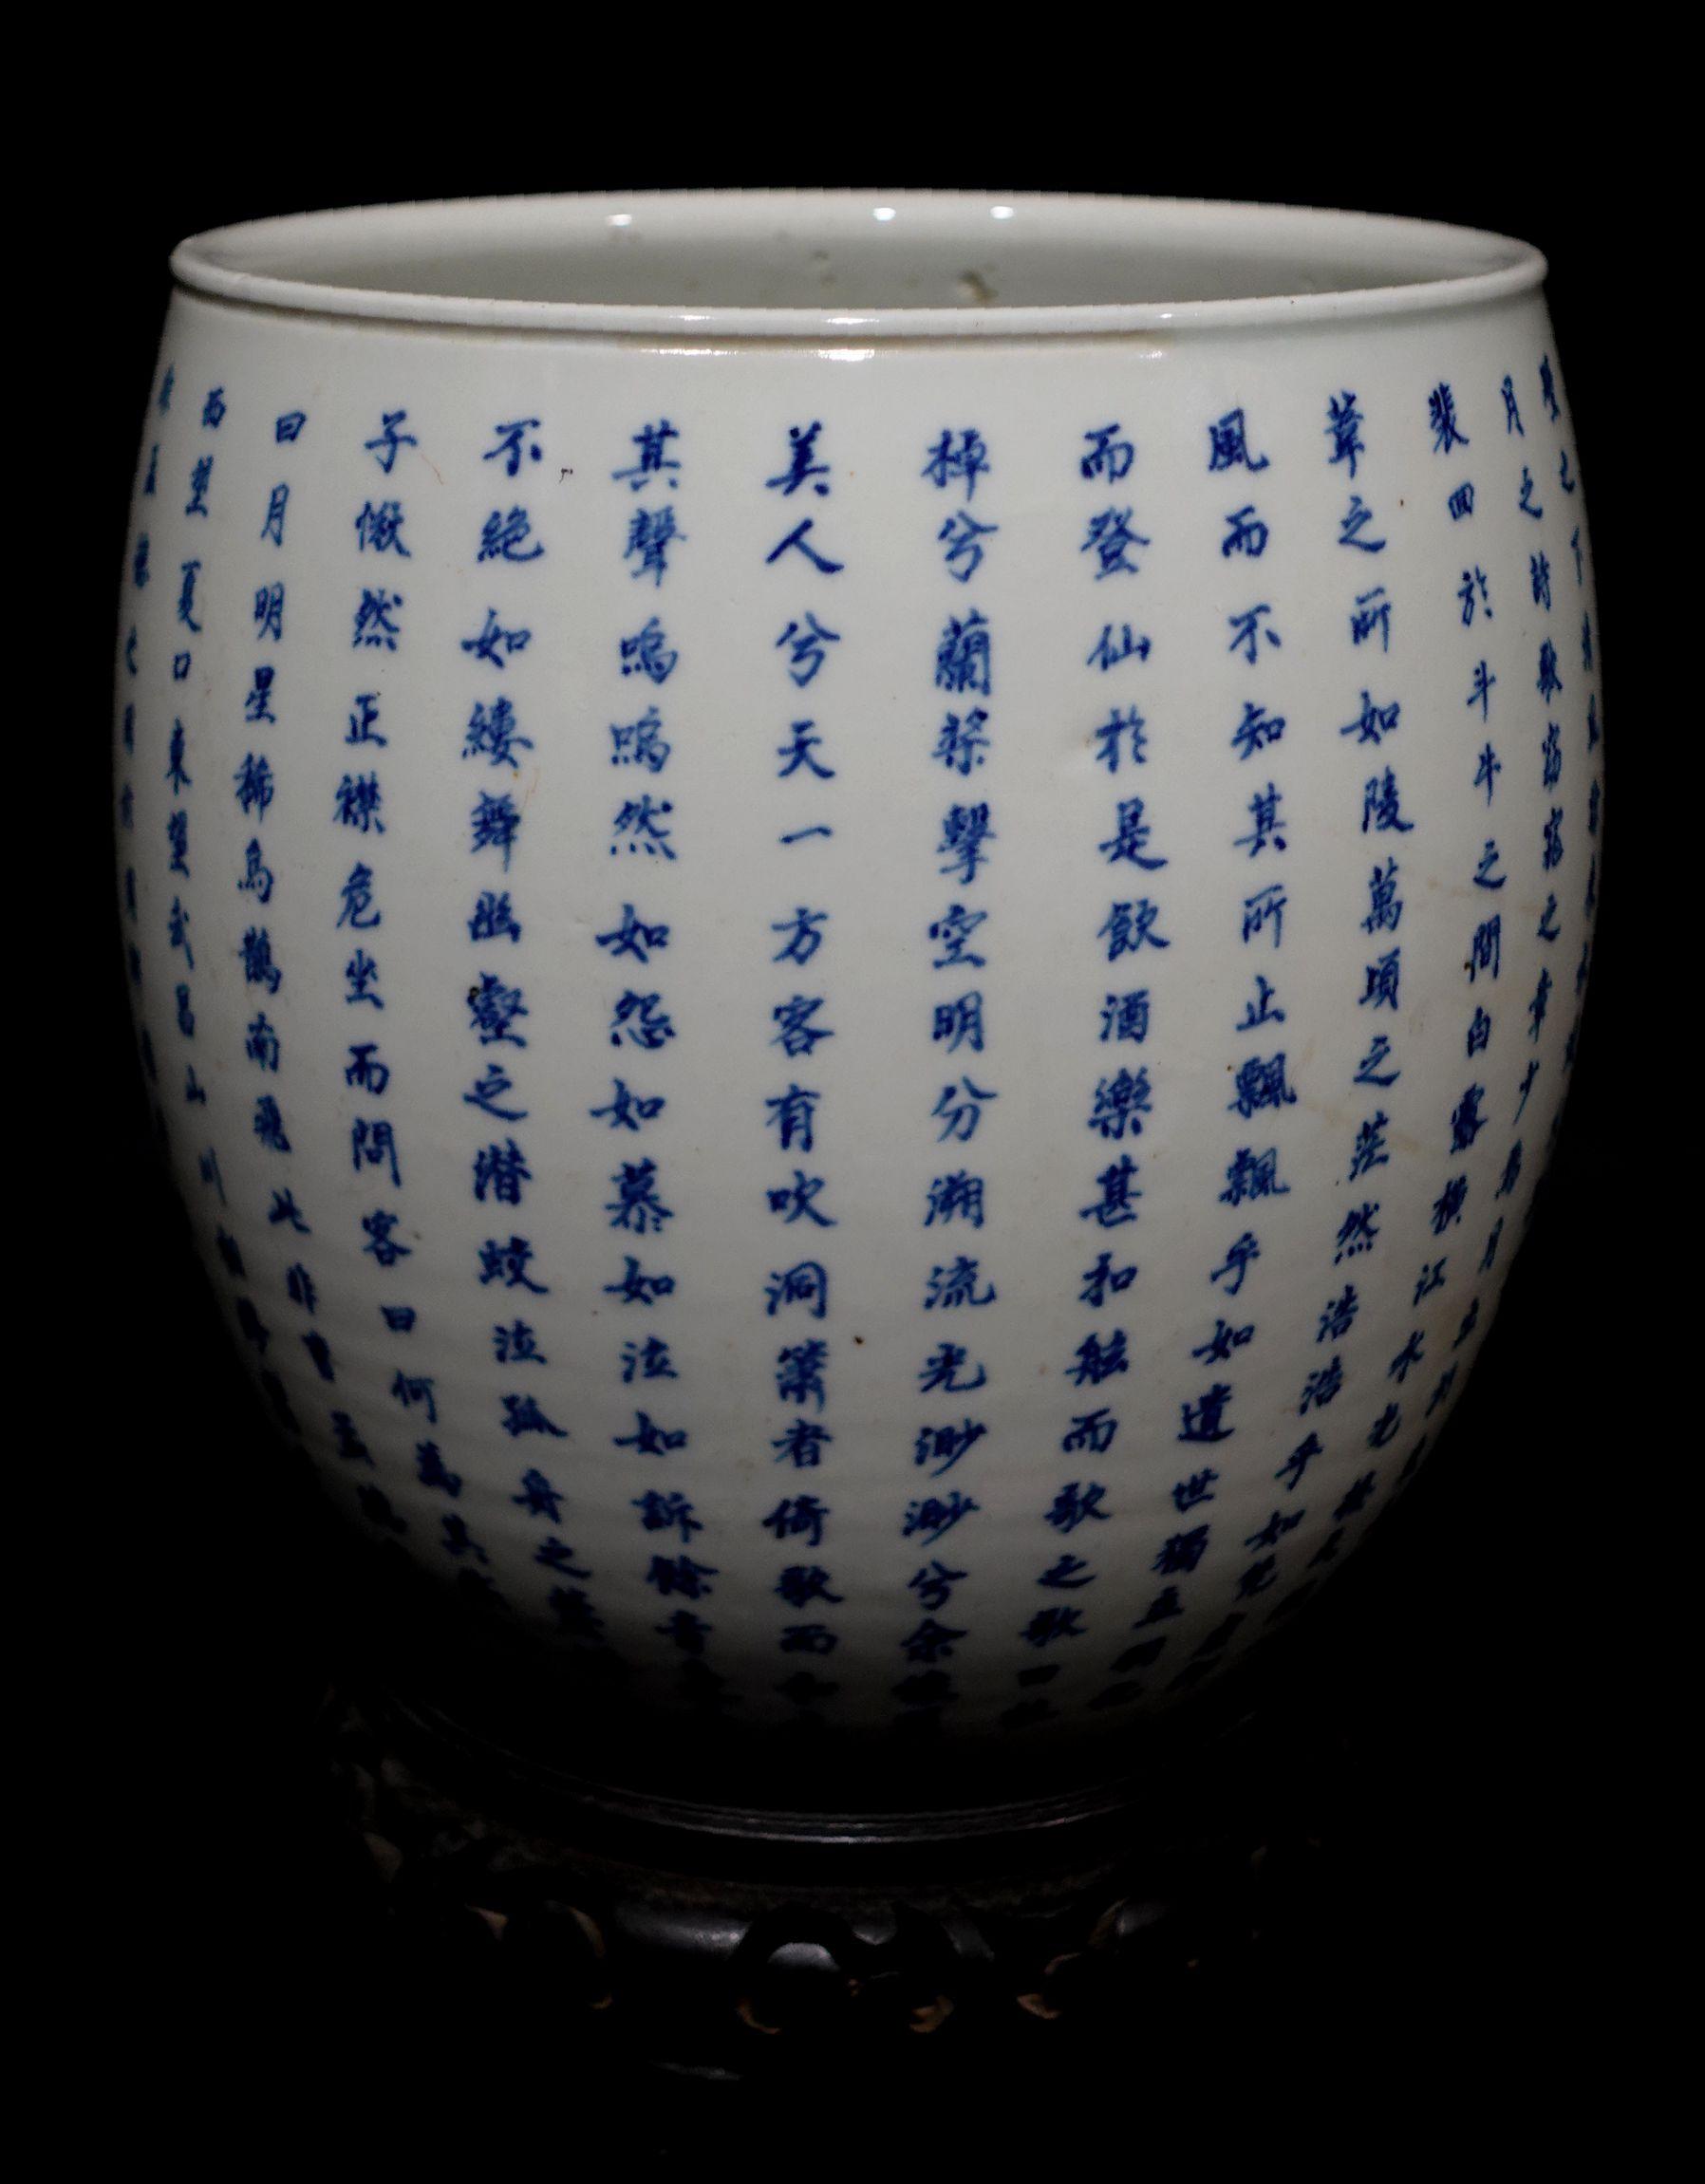 A charming Chinese Calligraphy in Underglaze Blue Vase. 
The poem was written by a great poet Su Shi (1037-1101) in Song Dynasty.

Description about this poem;

Su Shi (蘇軾) and his friends was traveling to Red Nose Cliff (赤鼻磯) in the west of